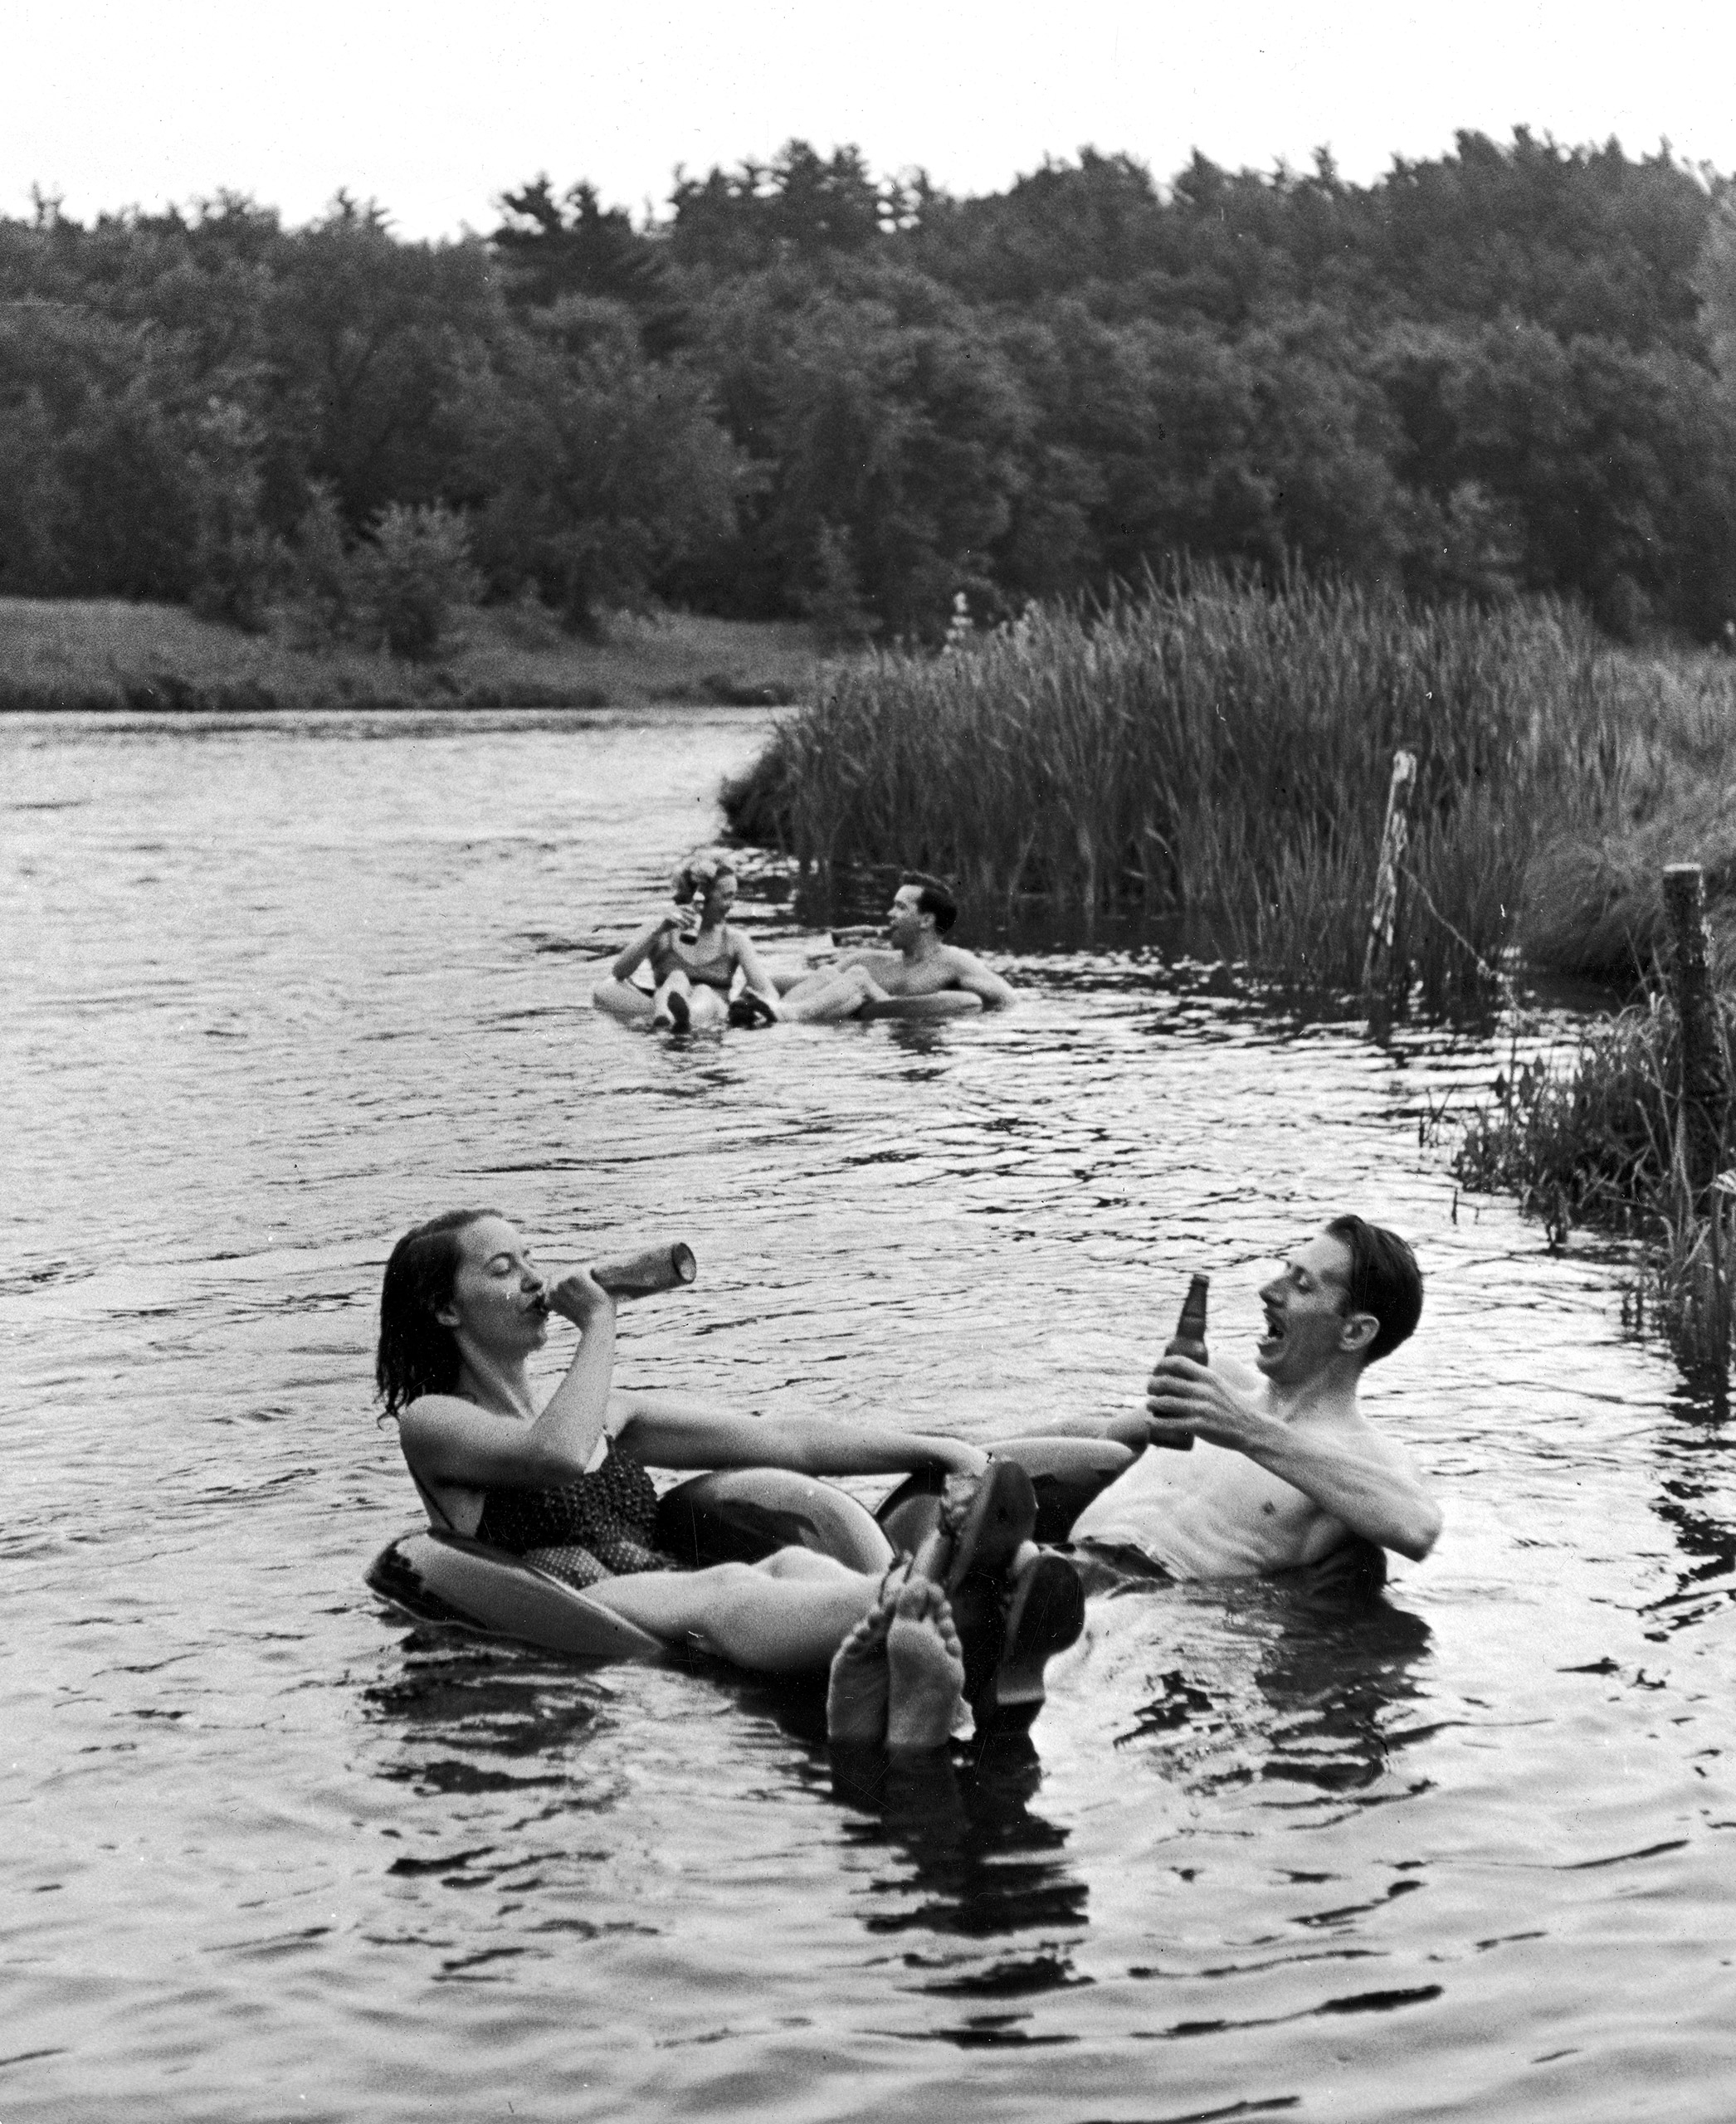 A floating party on the Apple River in Somerset, Wisconsin in 1941.